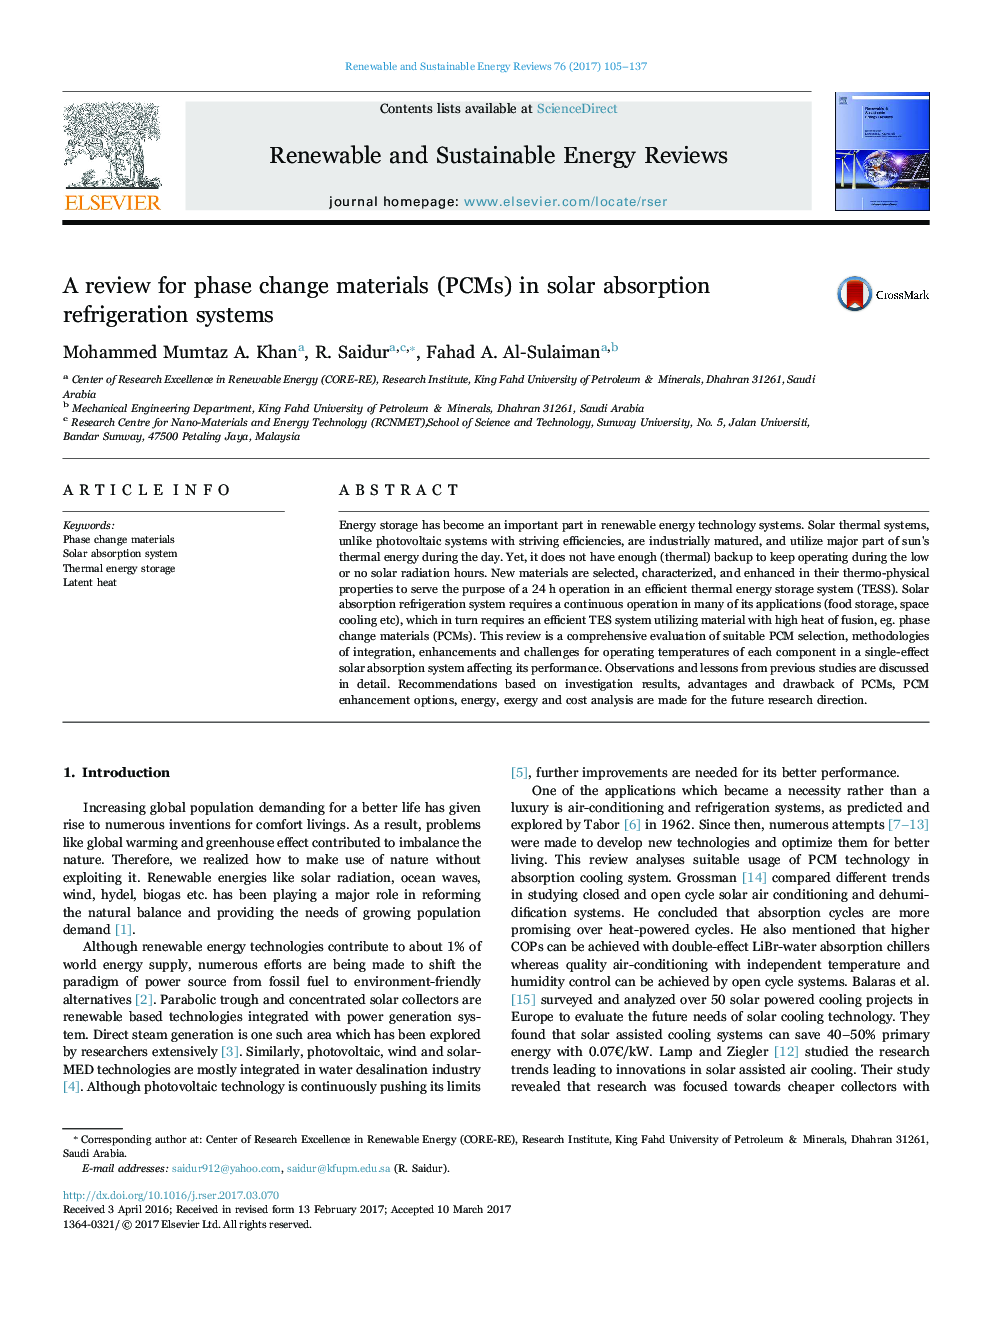 A review for phase change materials (PCMs) in solar absorption refrigeration systems